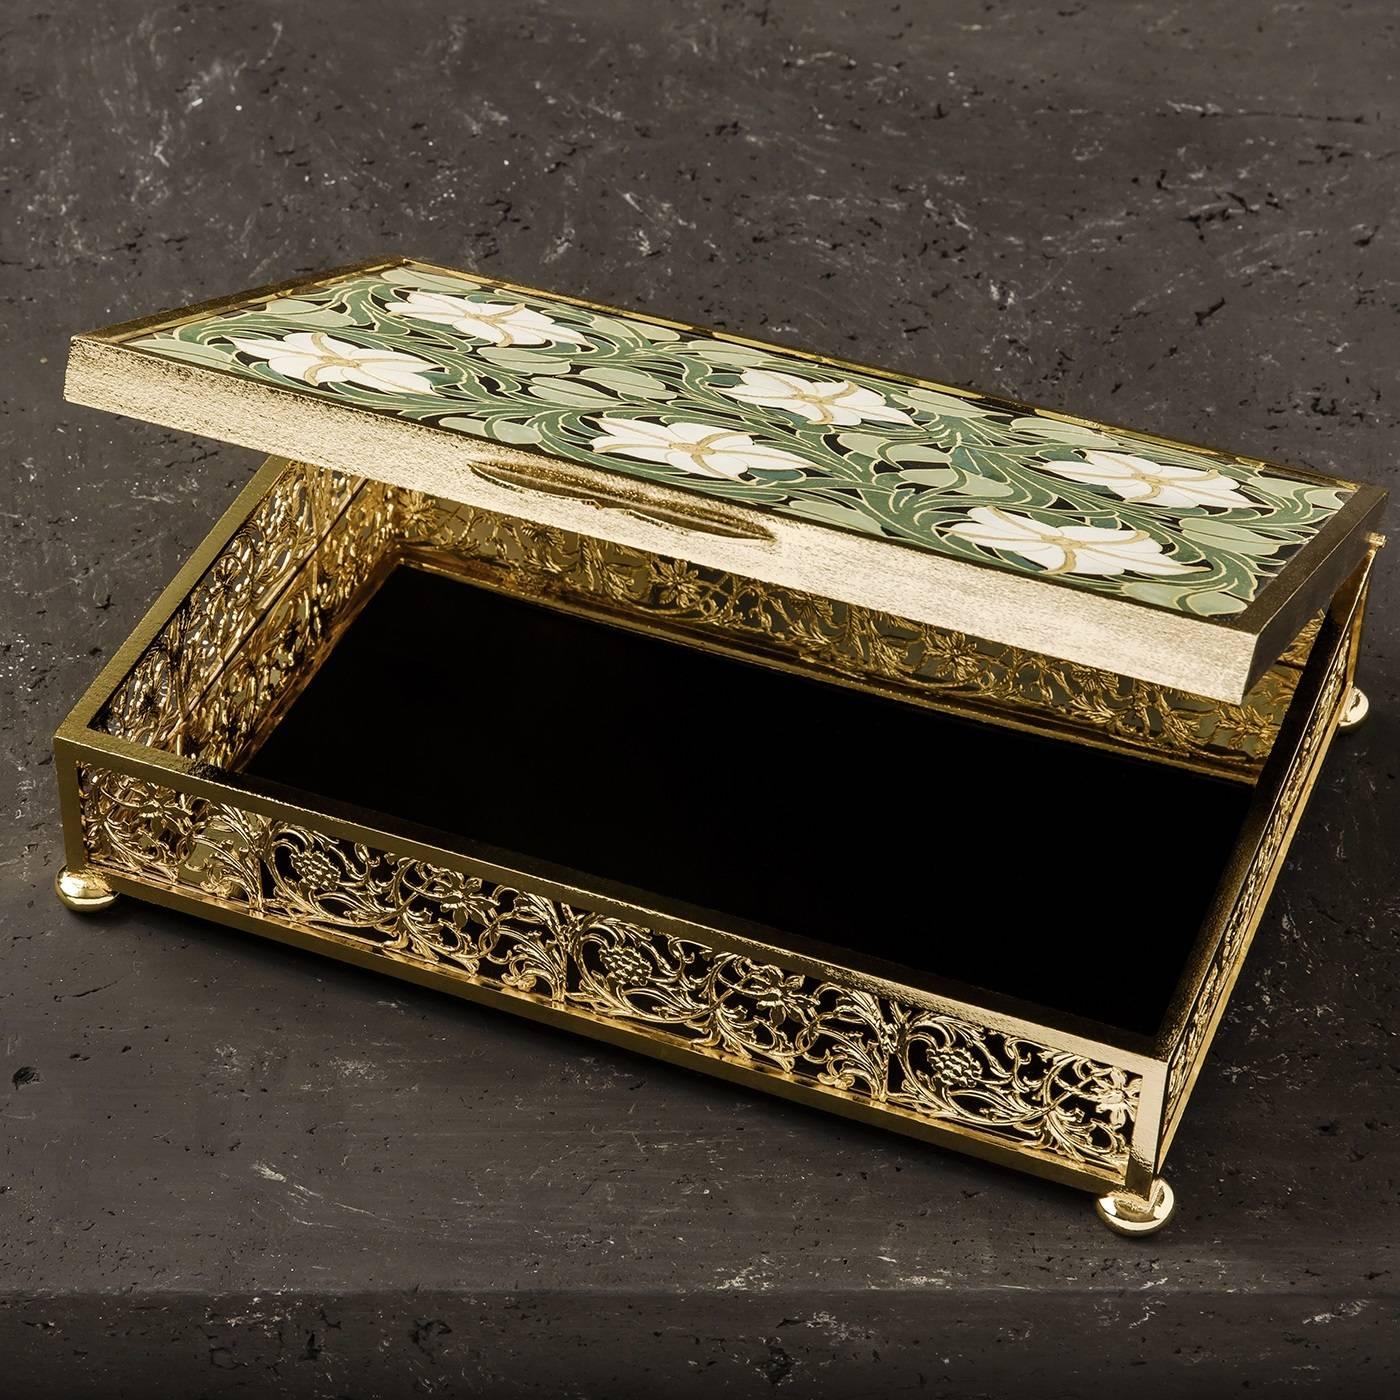 This box is a on-of-a-kind work of expert craftsmanship and is part in the Luxury collection by Bianco Bianchi. The lid is attached by a gold-plated bronze hinge. The wrought iron structure features strikingly intricate details which were made by